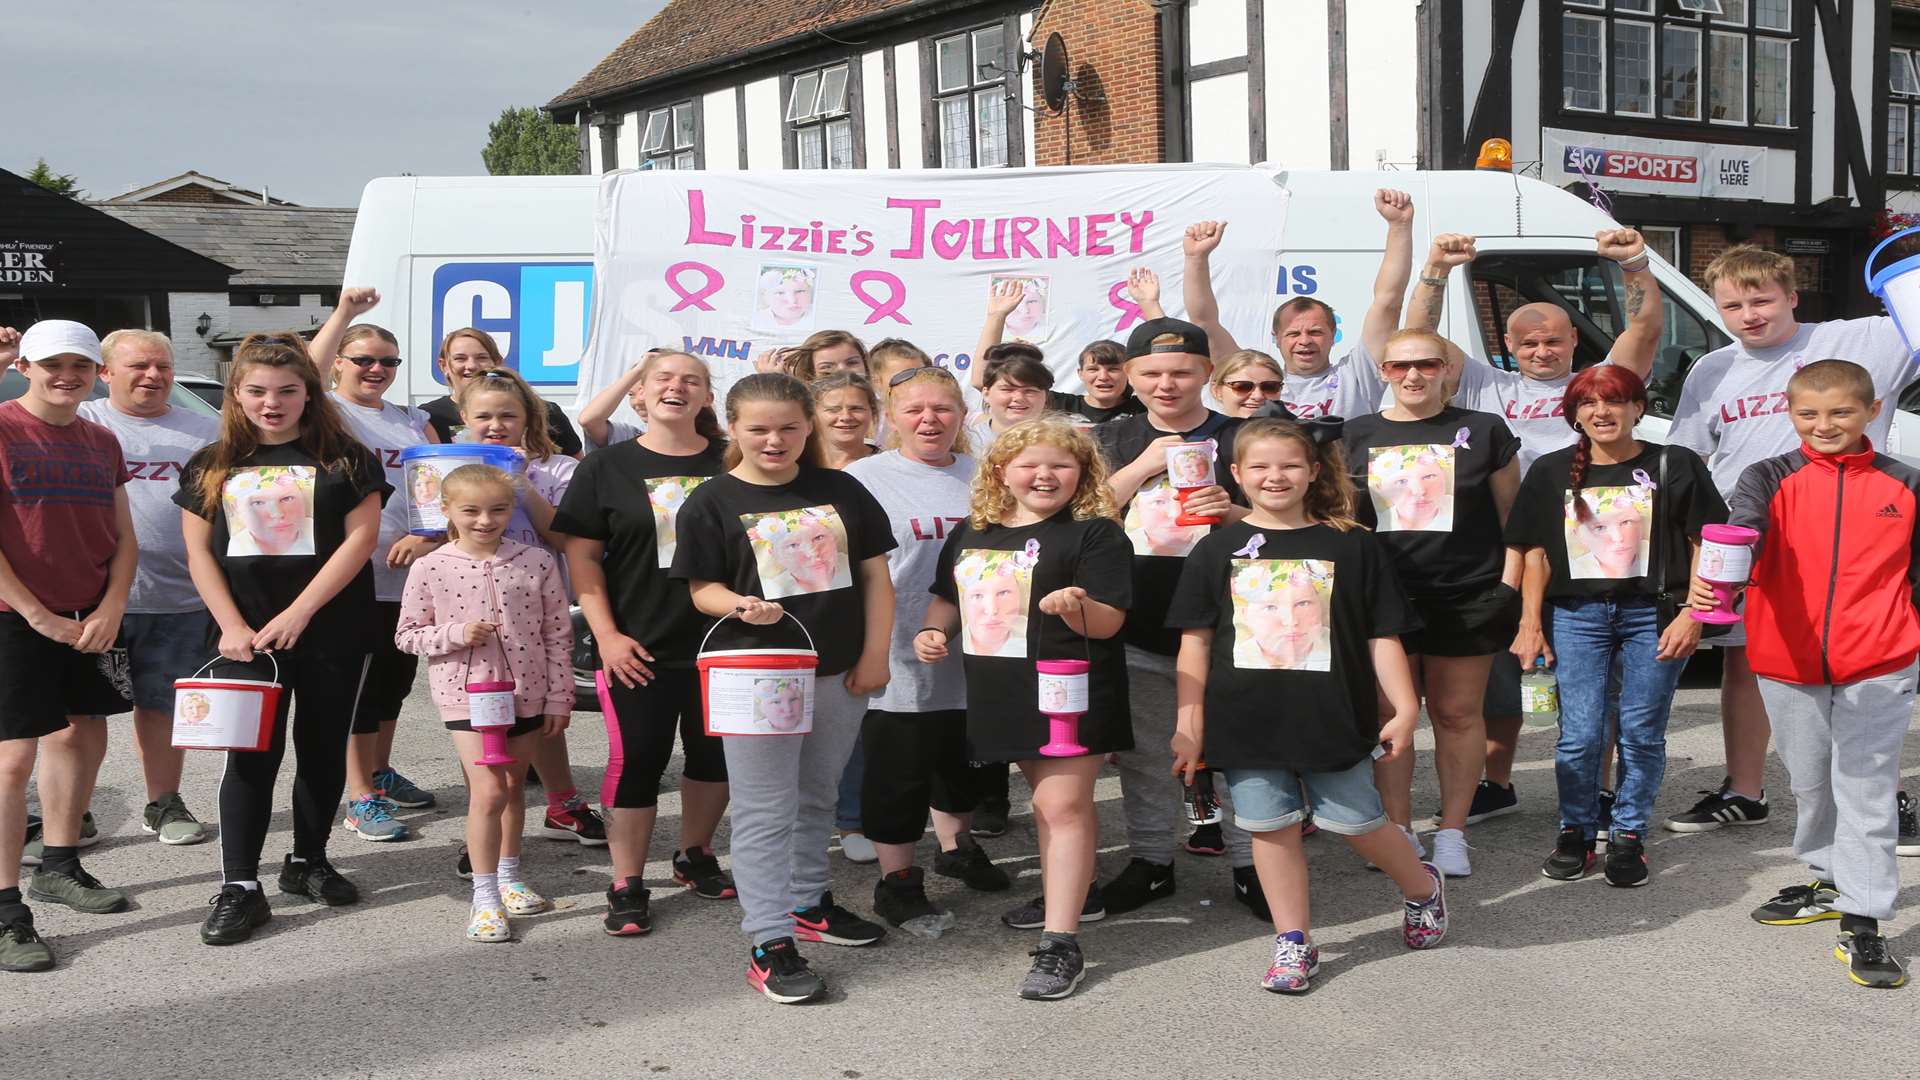 Kath Adams, centre in grey sweatshirt, surrounded by family, friends and supporters at the start of their 9-10 mile sponsored walk from Teynham to Rainham Railway Station to raise money for Lizzy Adams, who has a brain tumour.